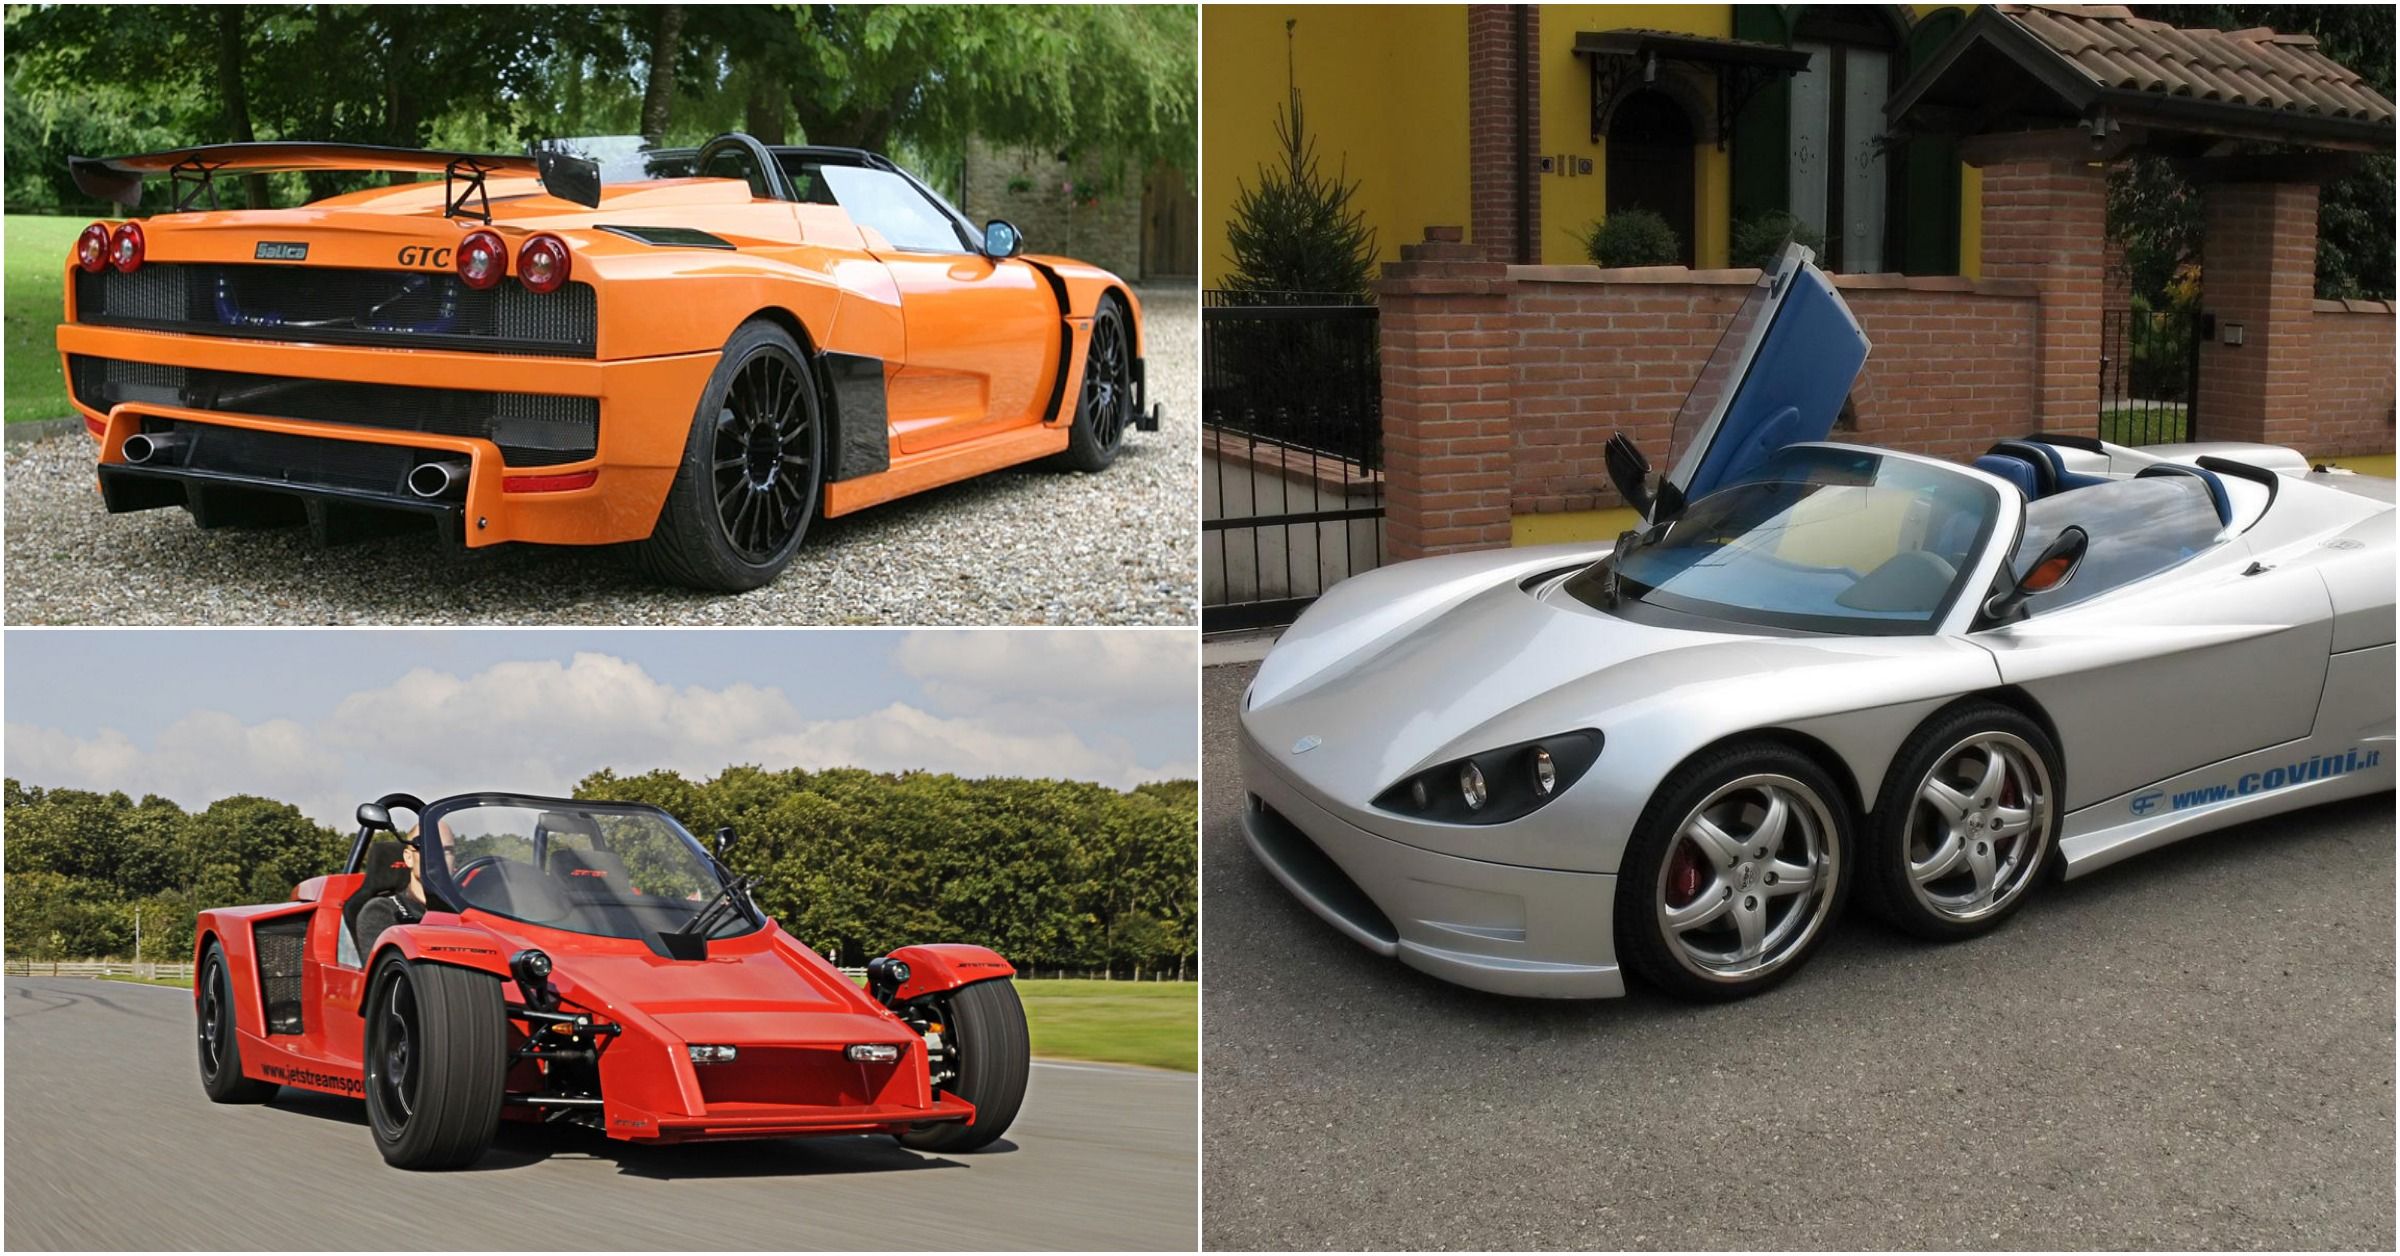 15 Ugly Sports Cars With Massive Engines (That Are Too Beastly For